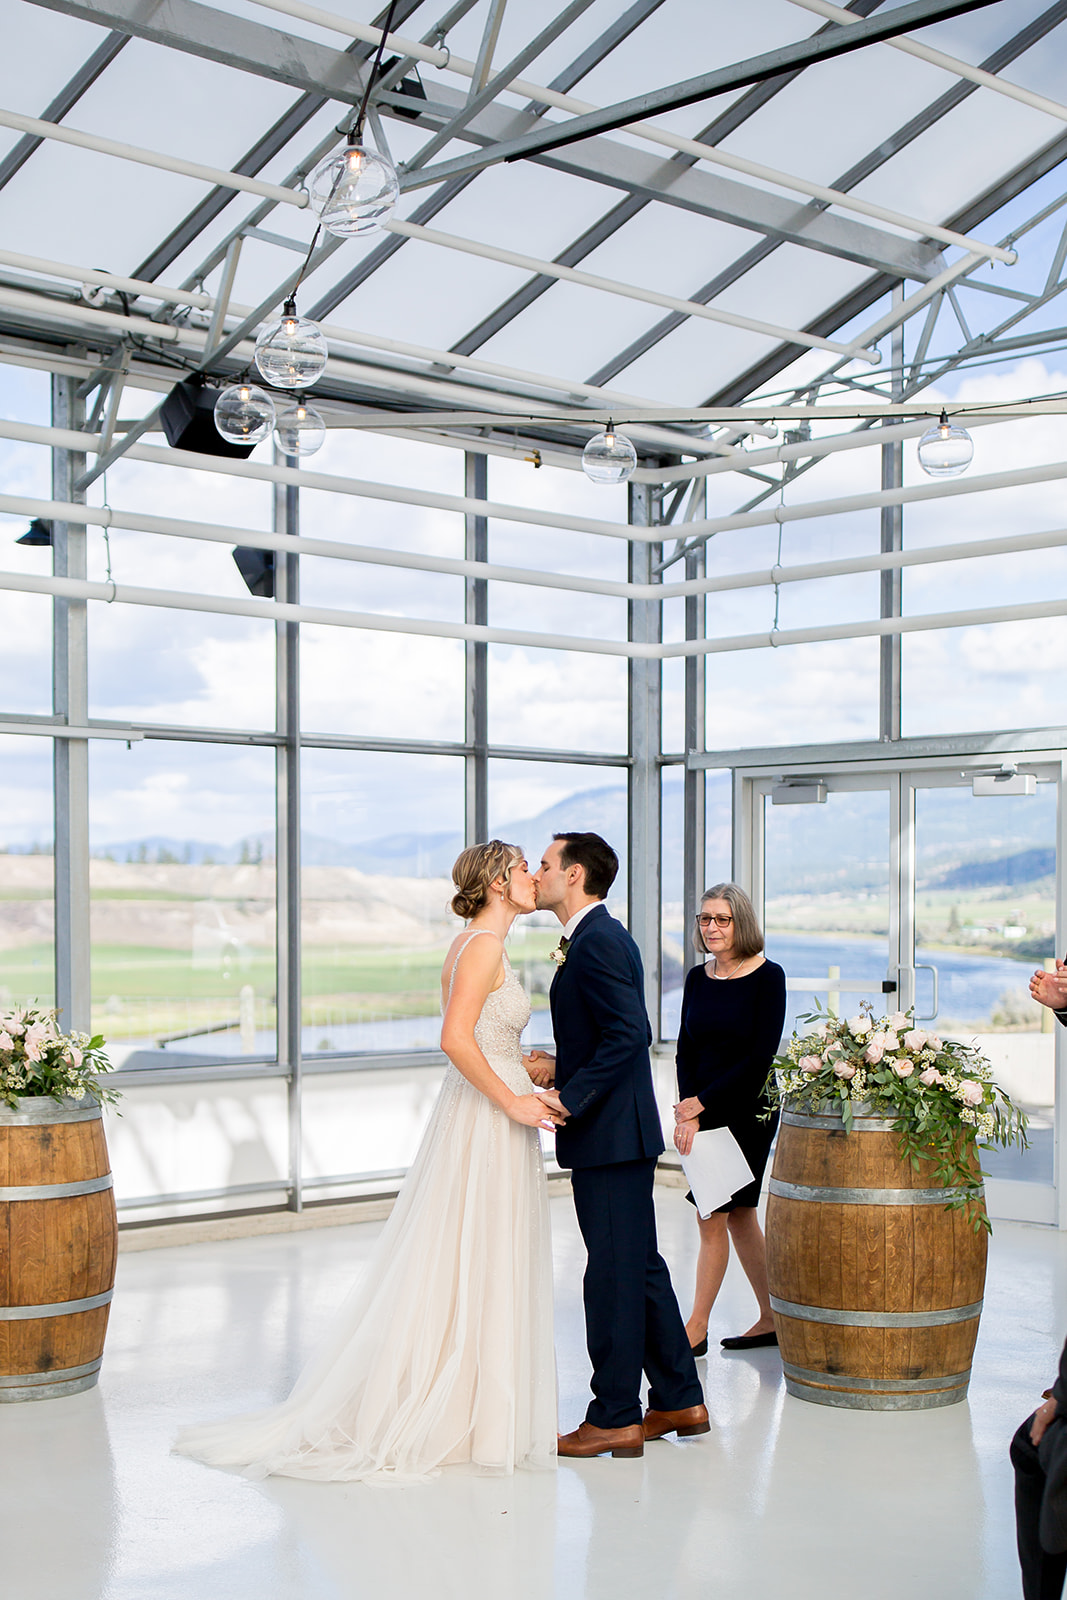 Bride and groom share a kiss inside their winery wedding venue after saying "I do"